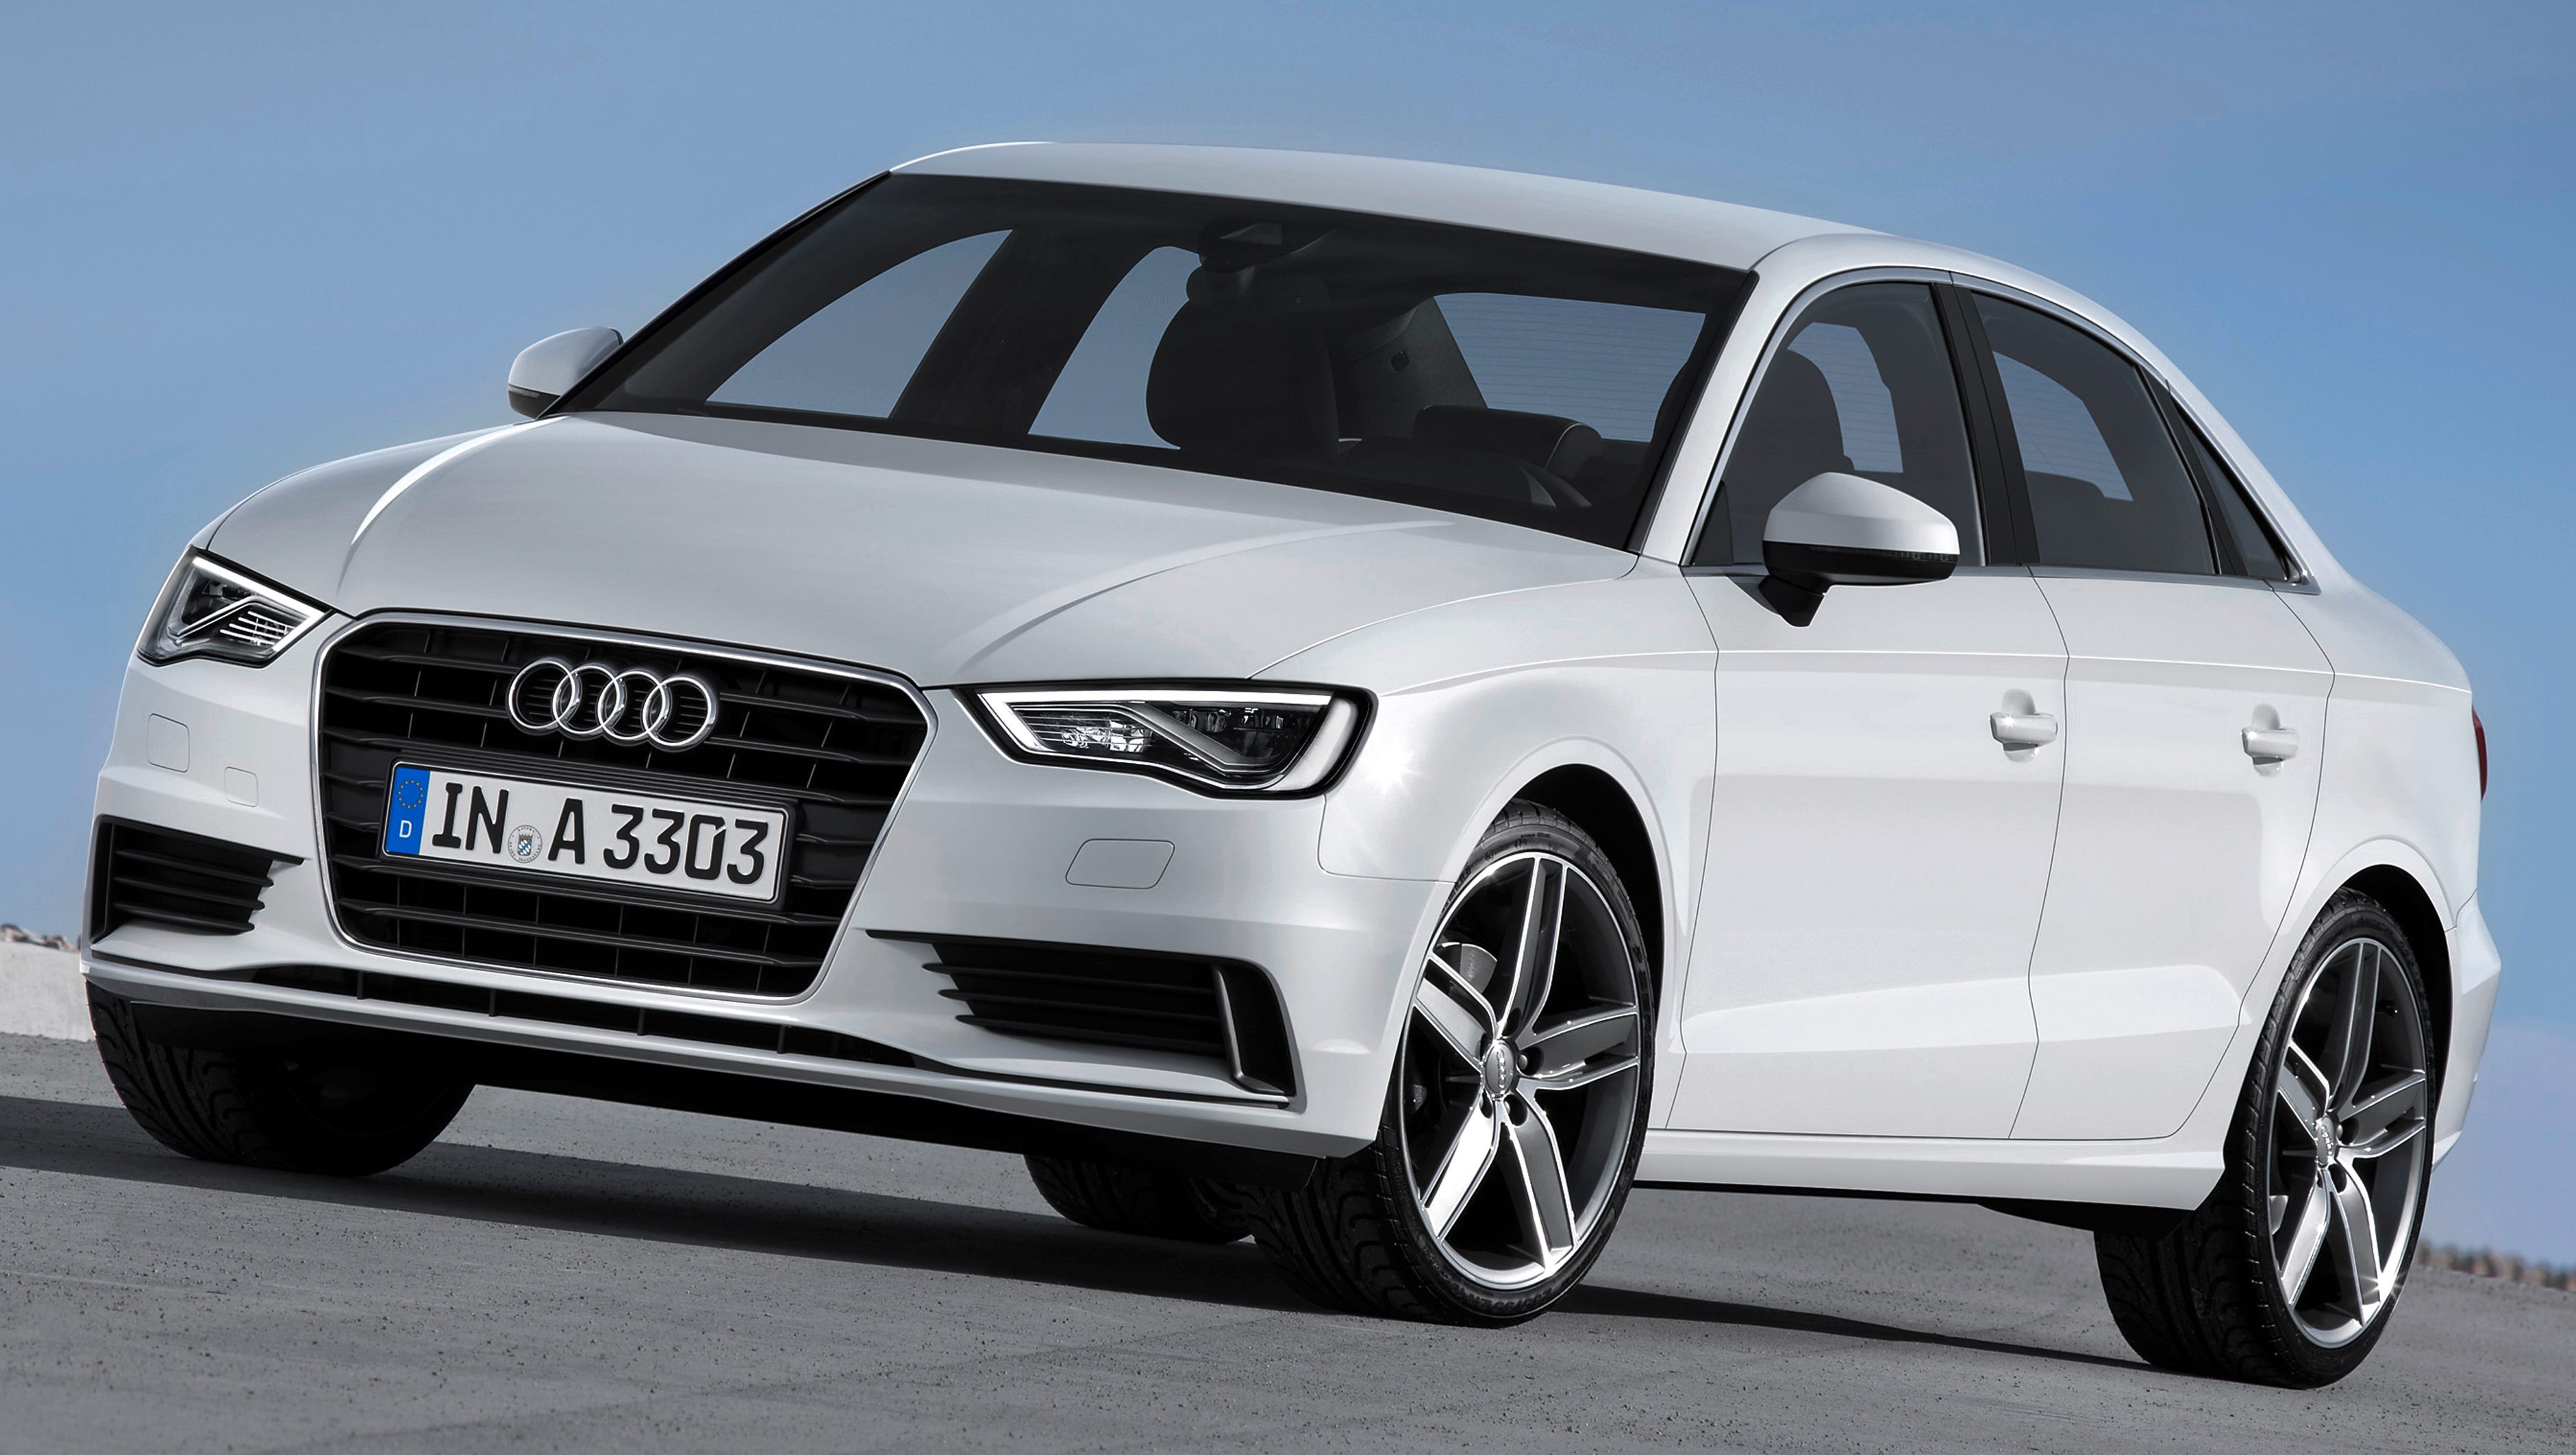 2015 Audi A3 has lots of tech -- in odd proportions